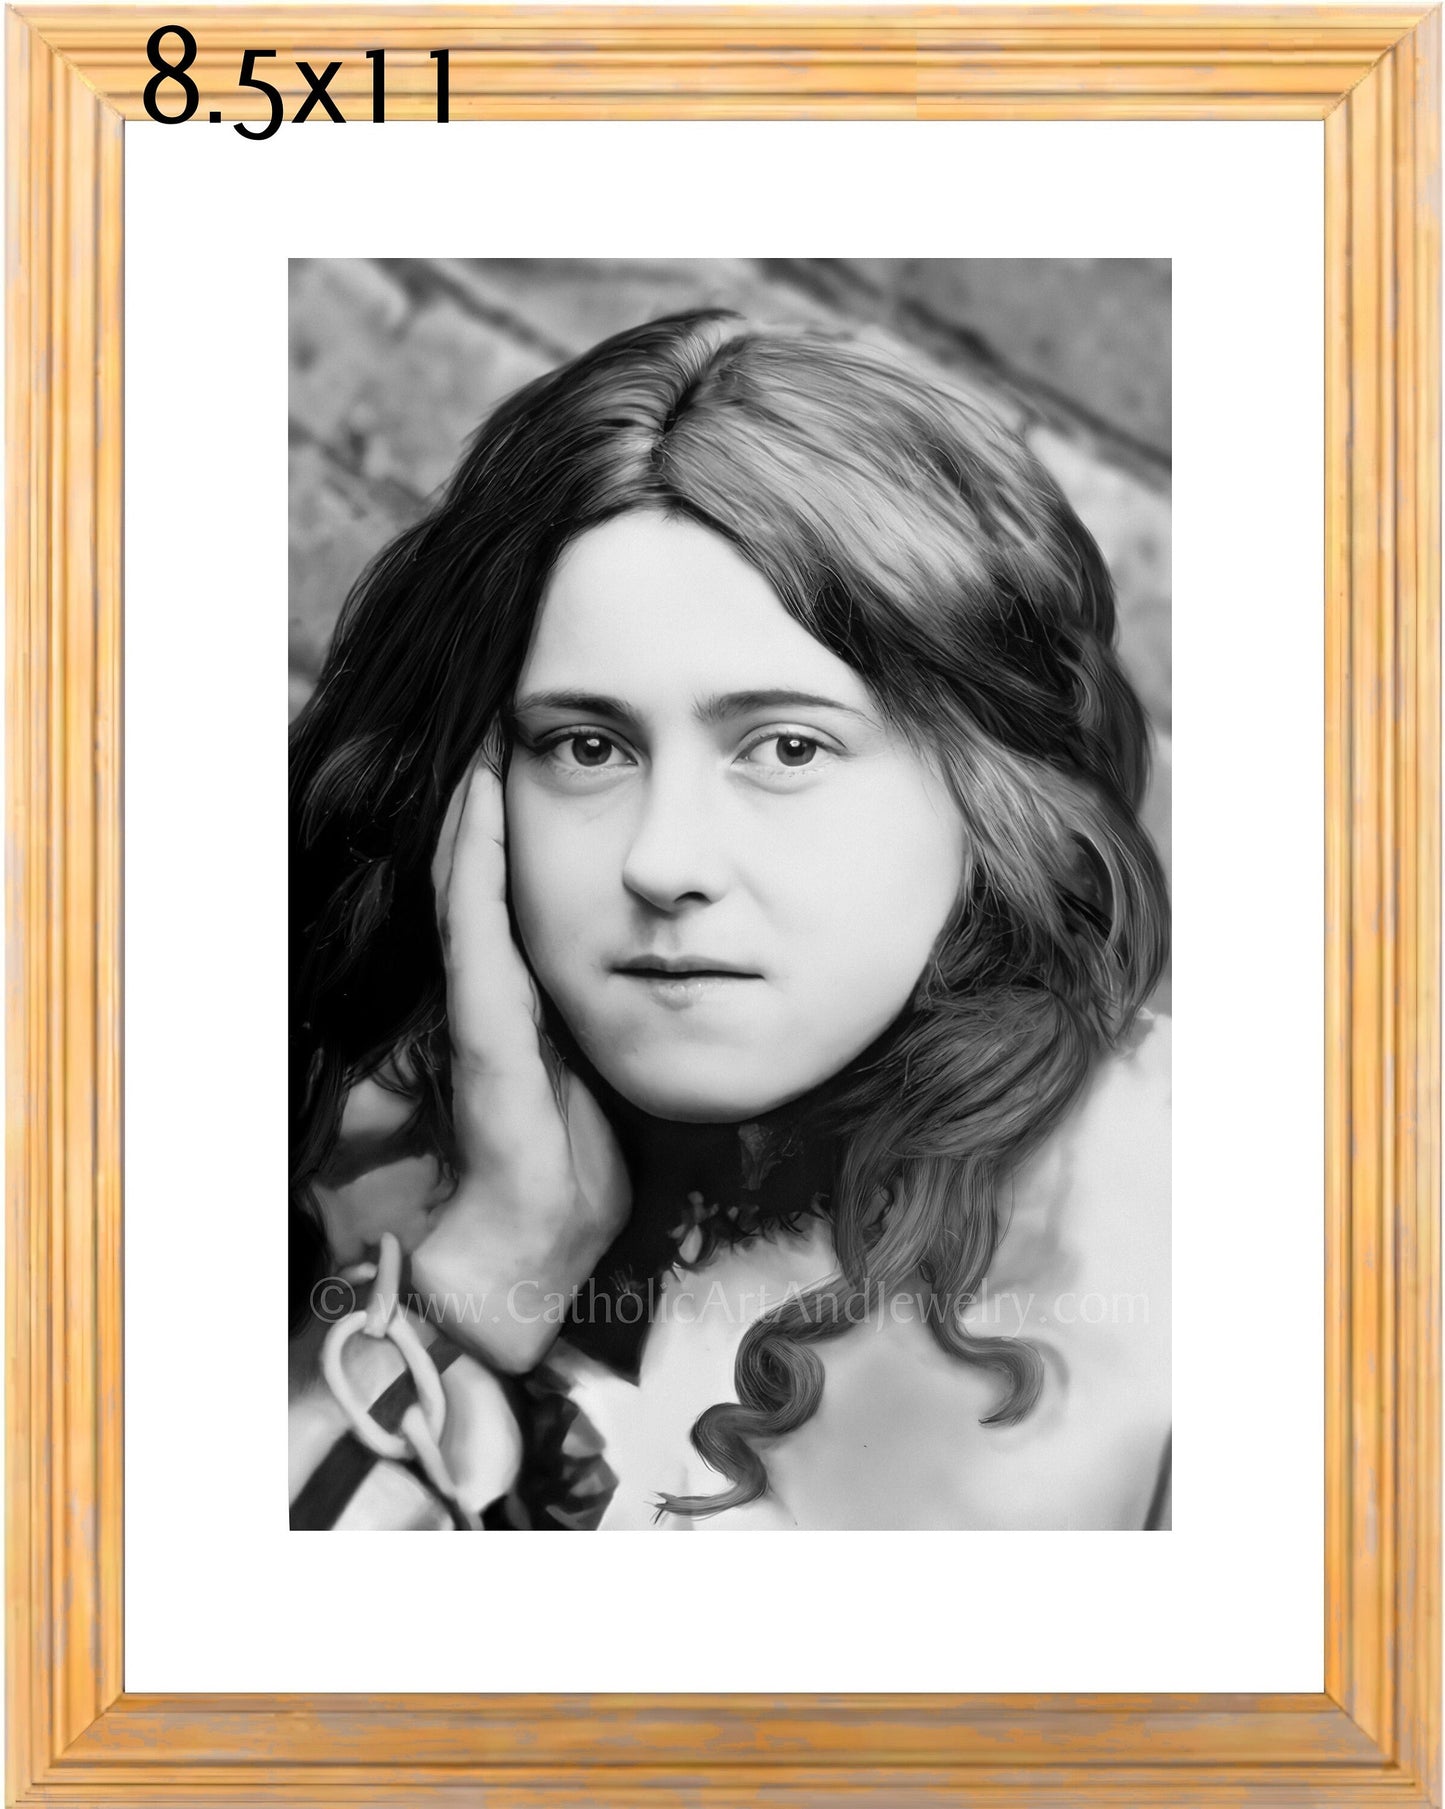 St Therese as Joan of Arc – Exclusive Photo Restoration!